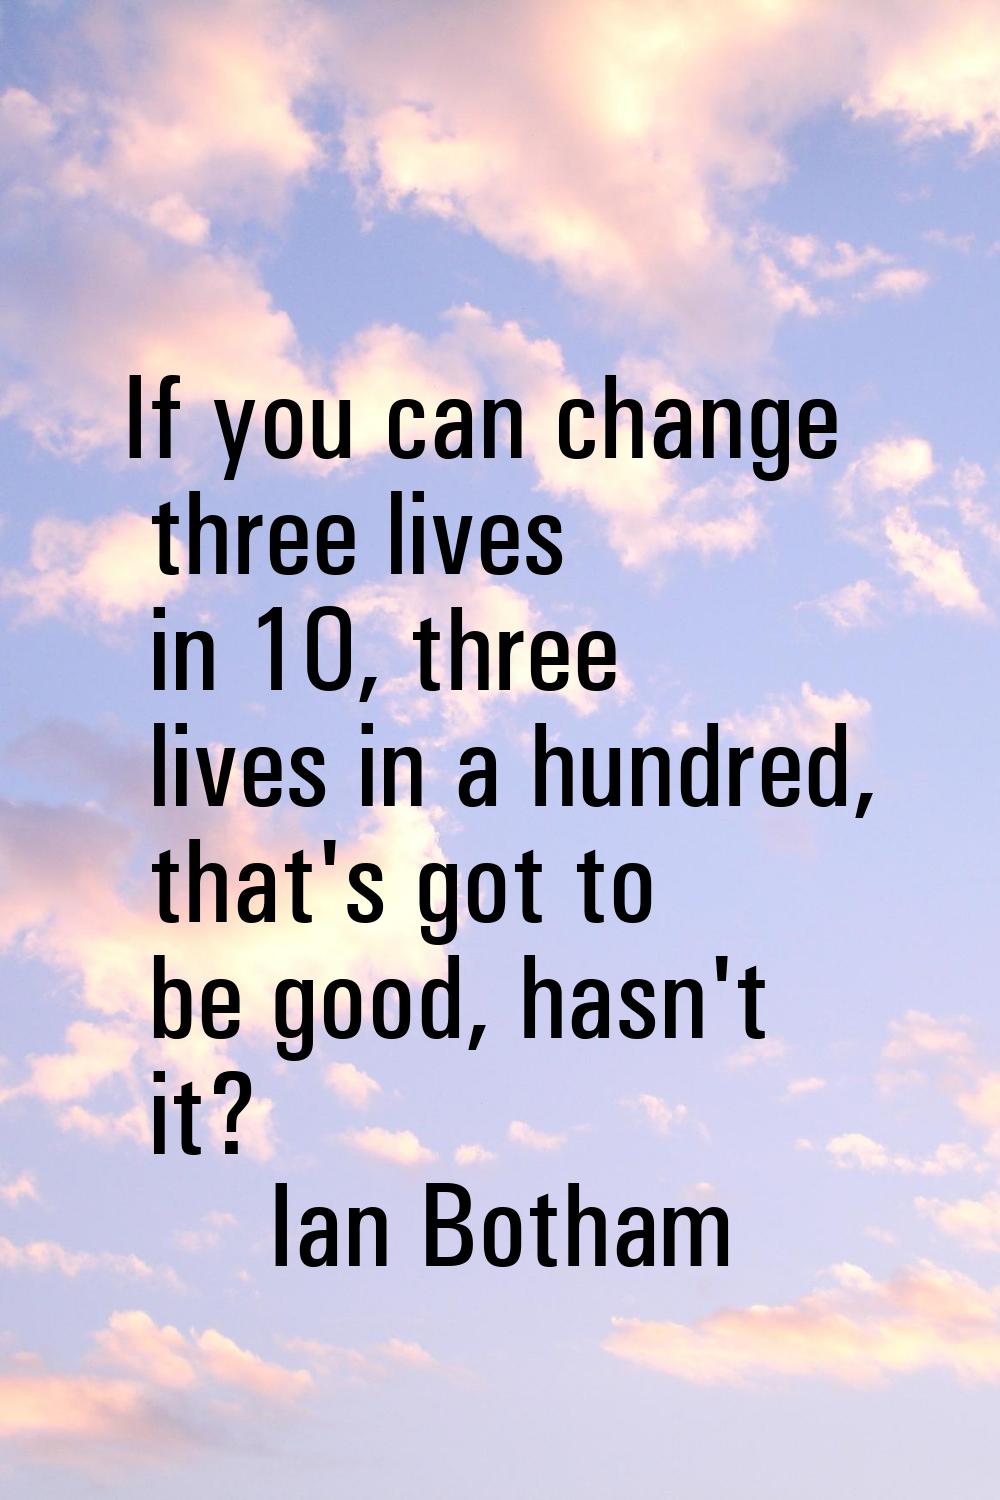 If you can change three lives in 10, three lives in a hundred, that's got to be good, hasn't it?